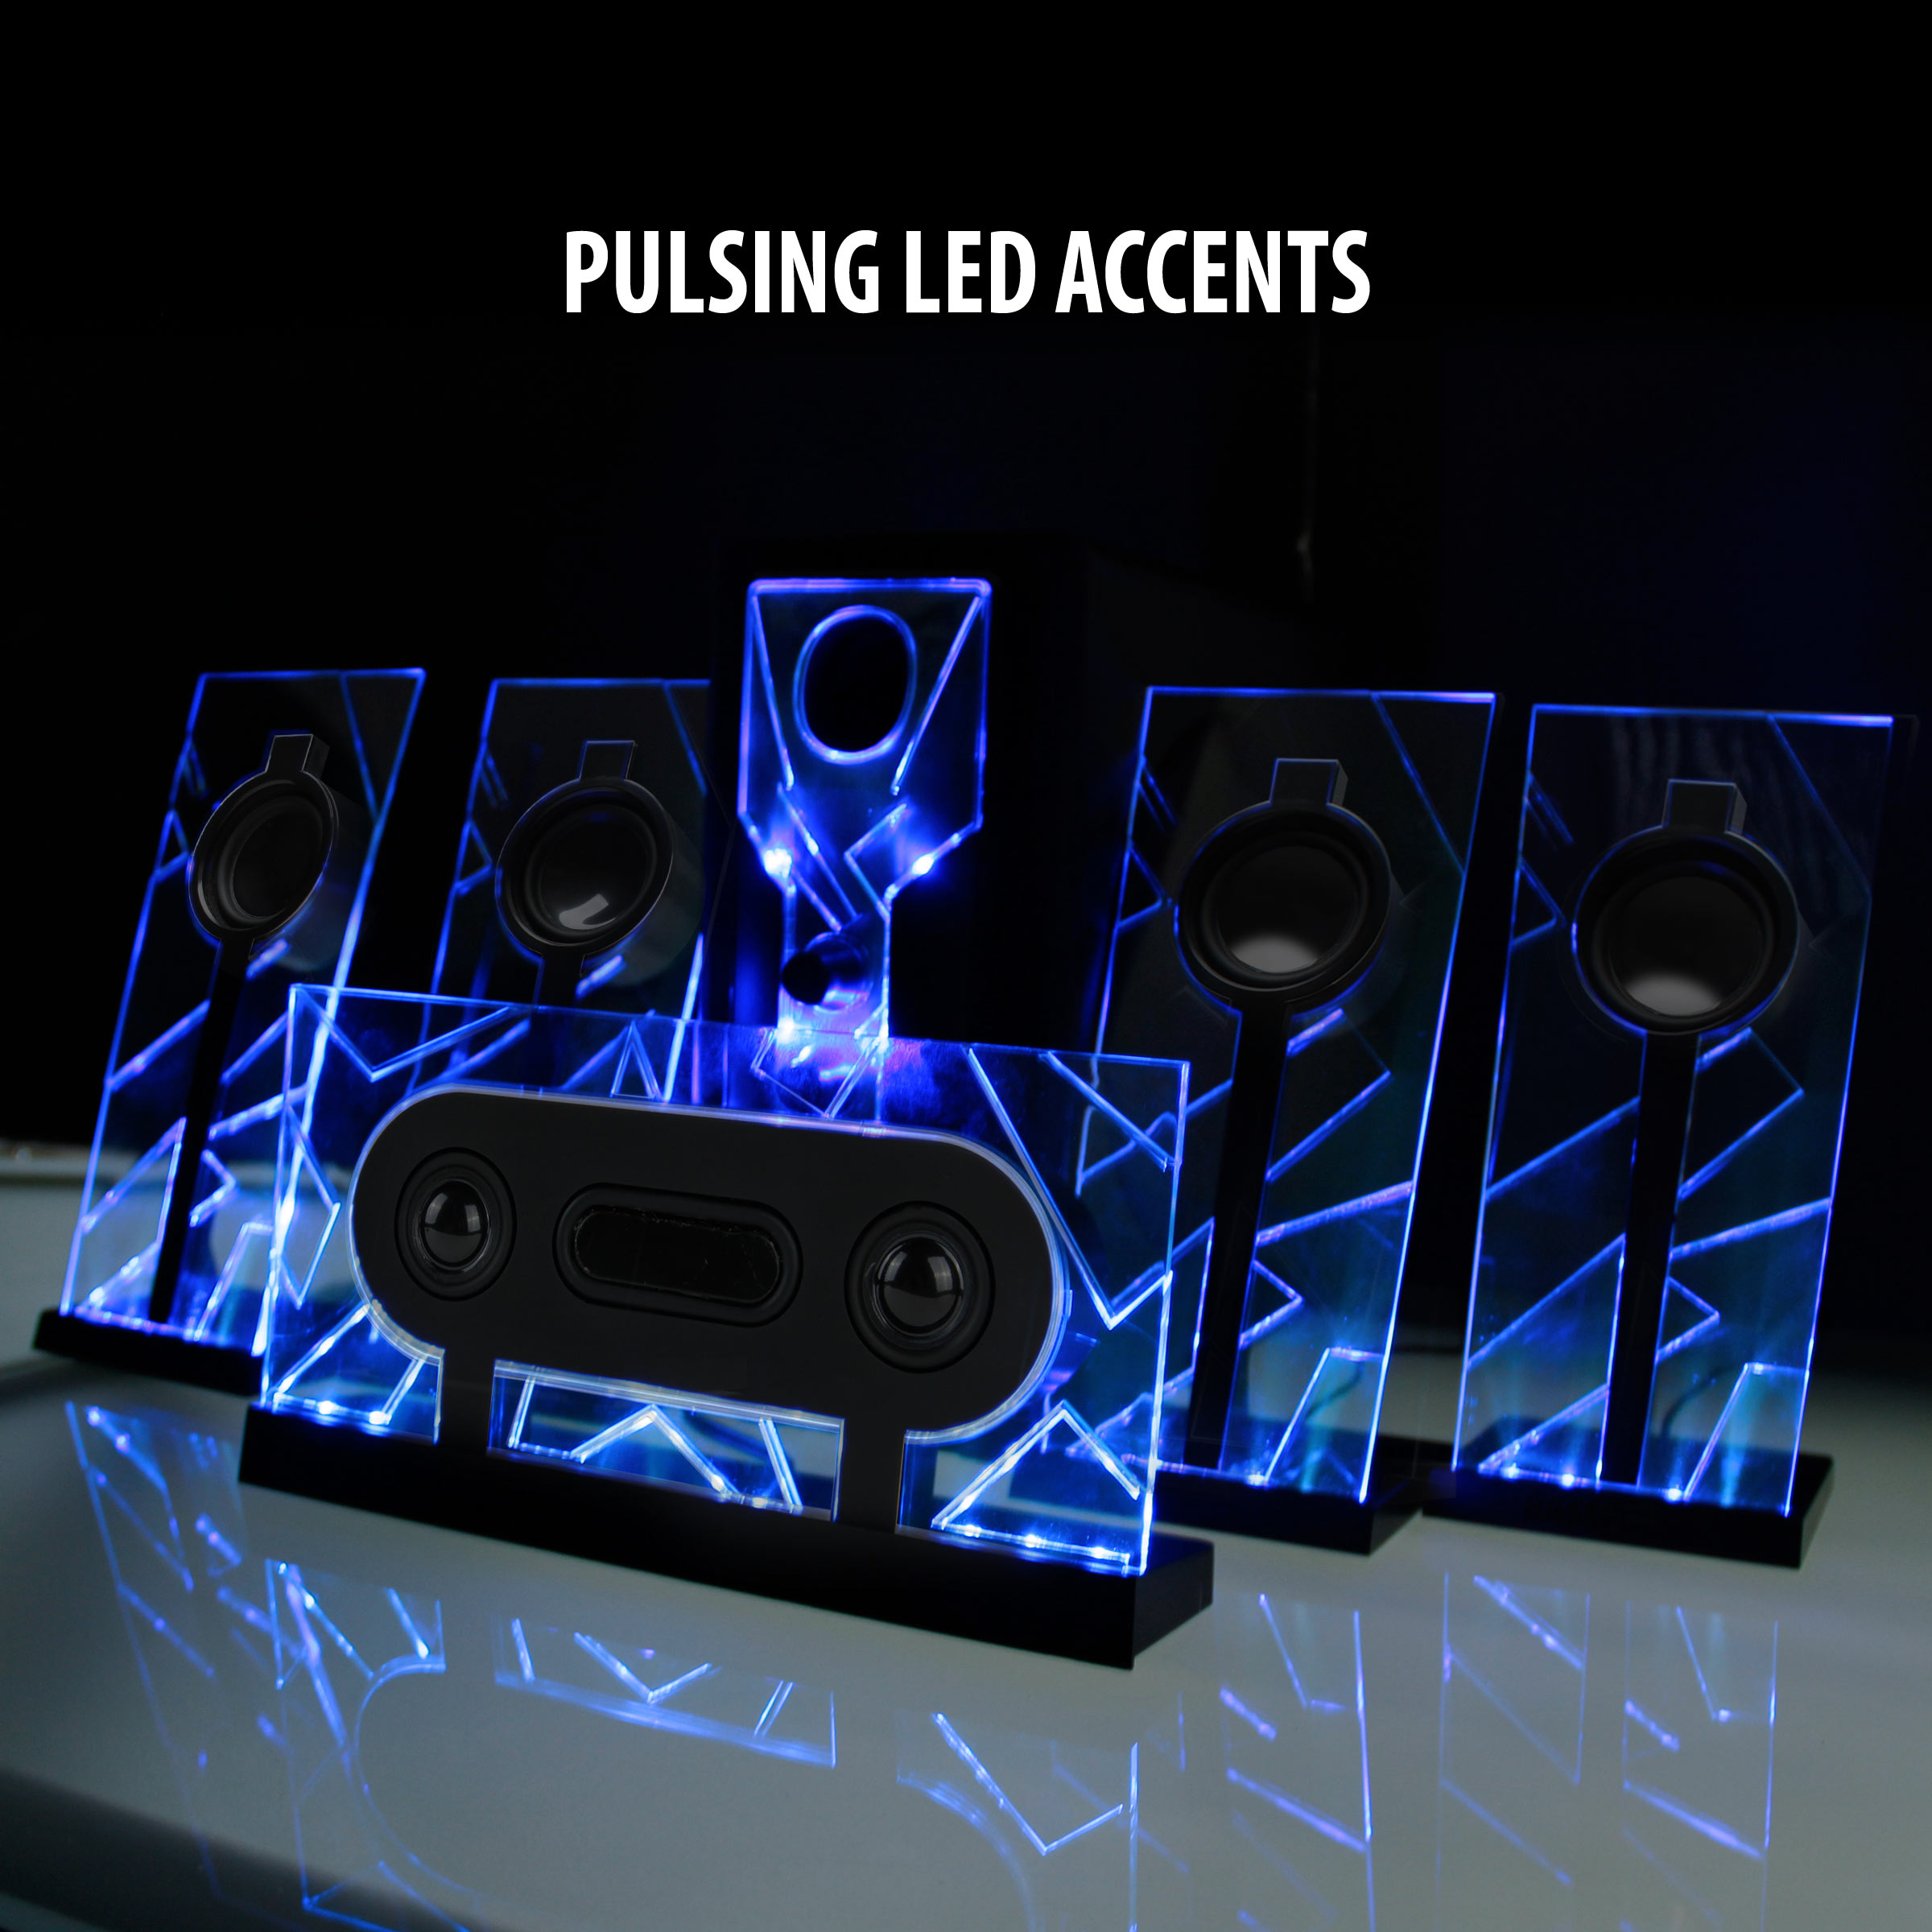 5.1 Surround Sound Computer Speakers with 80 Watts and Blue LED Glow